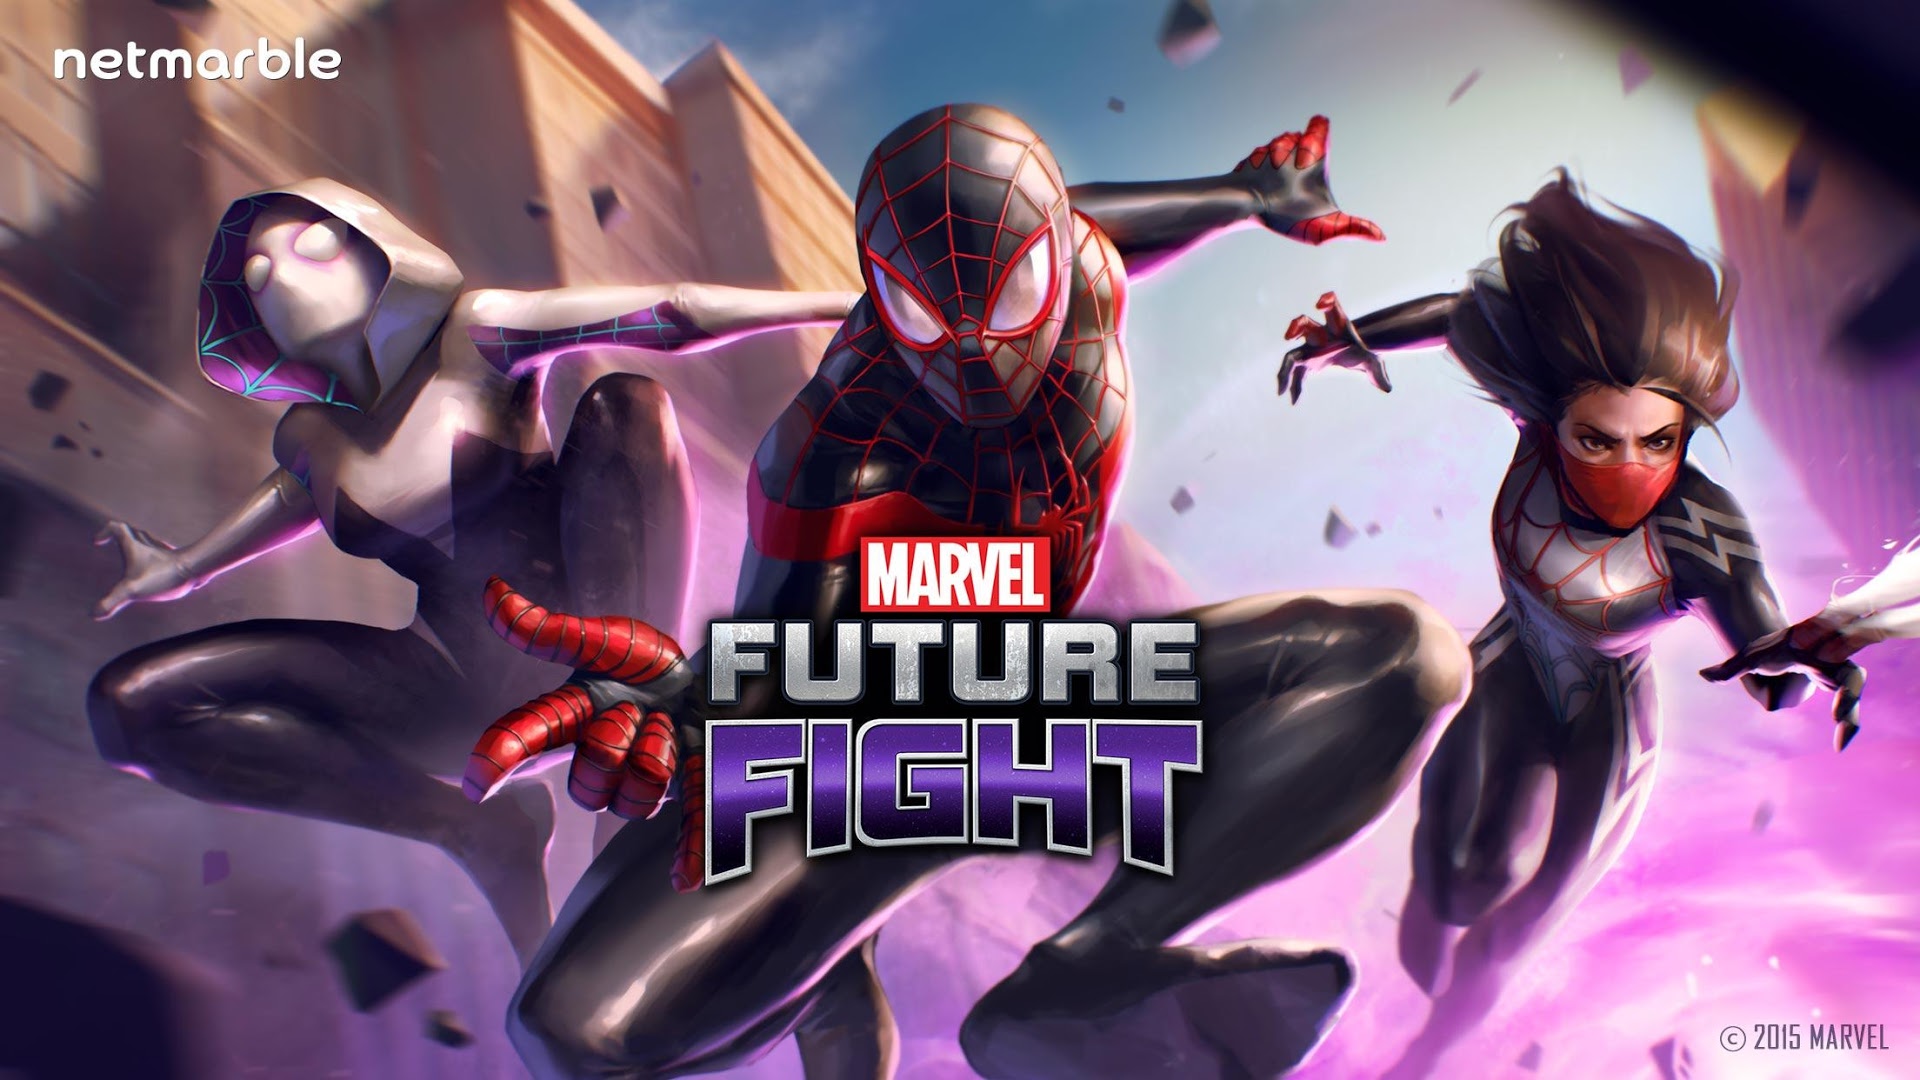 Marvel Future Fight Cover HD Wallpaper Background Image